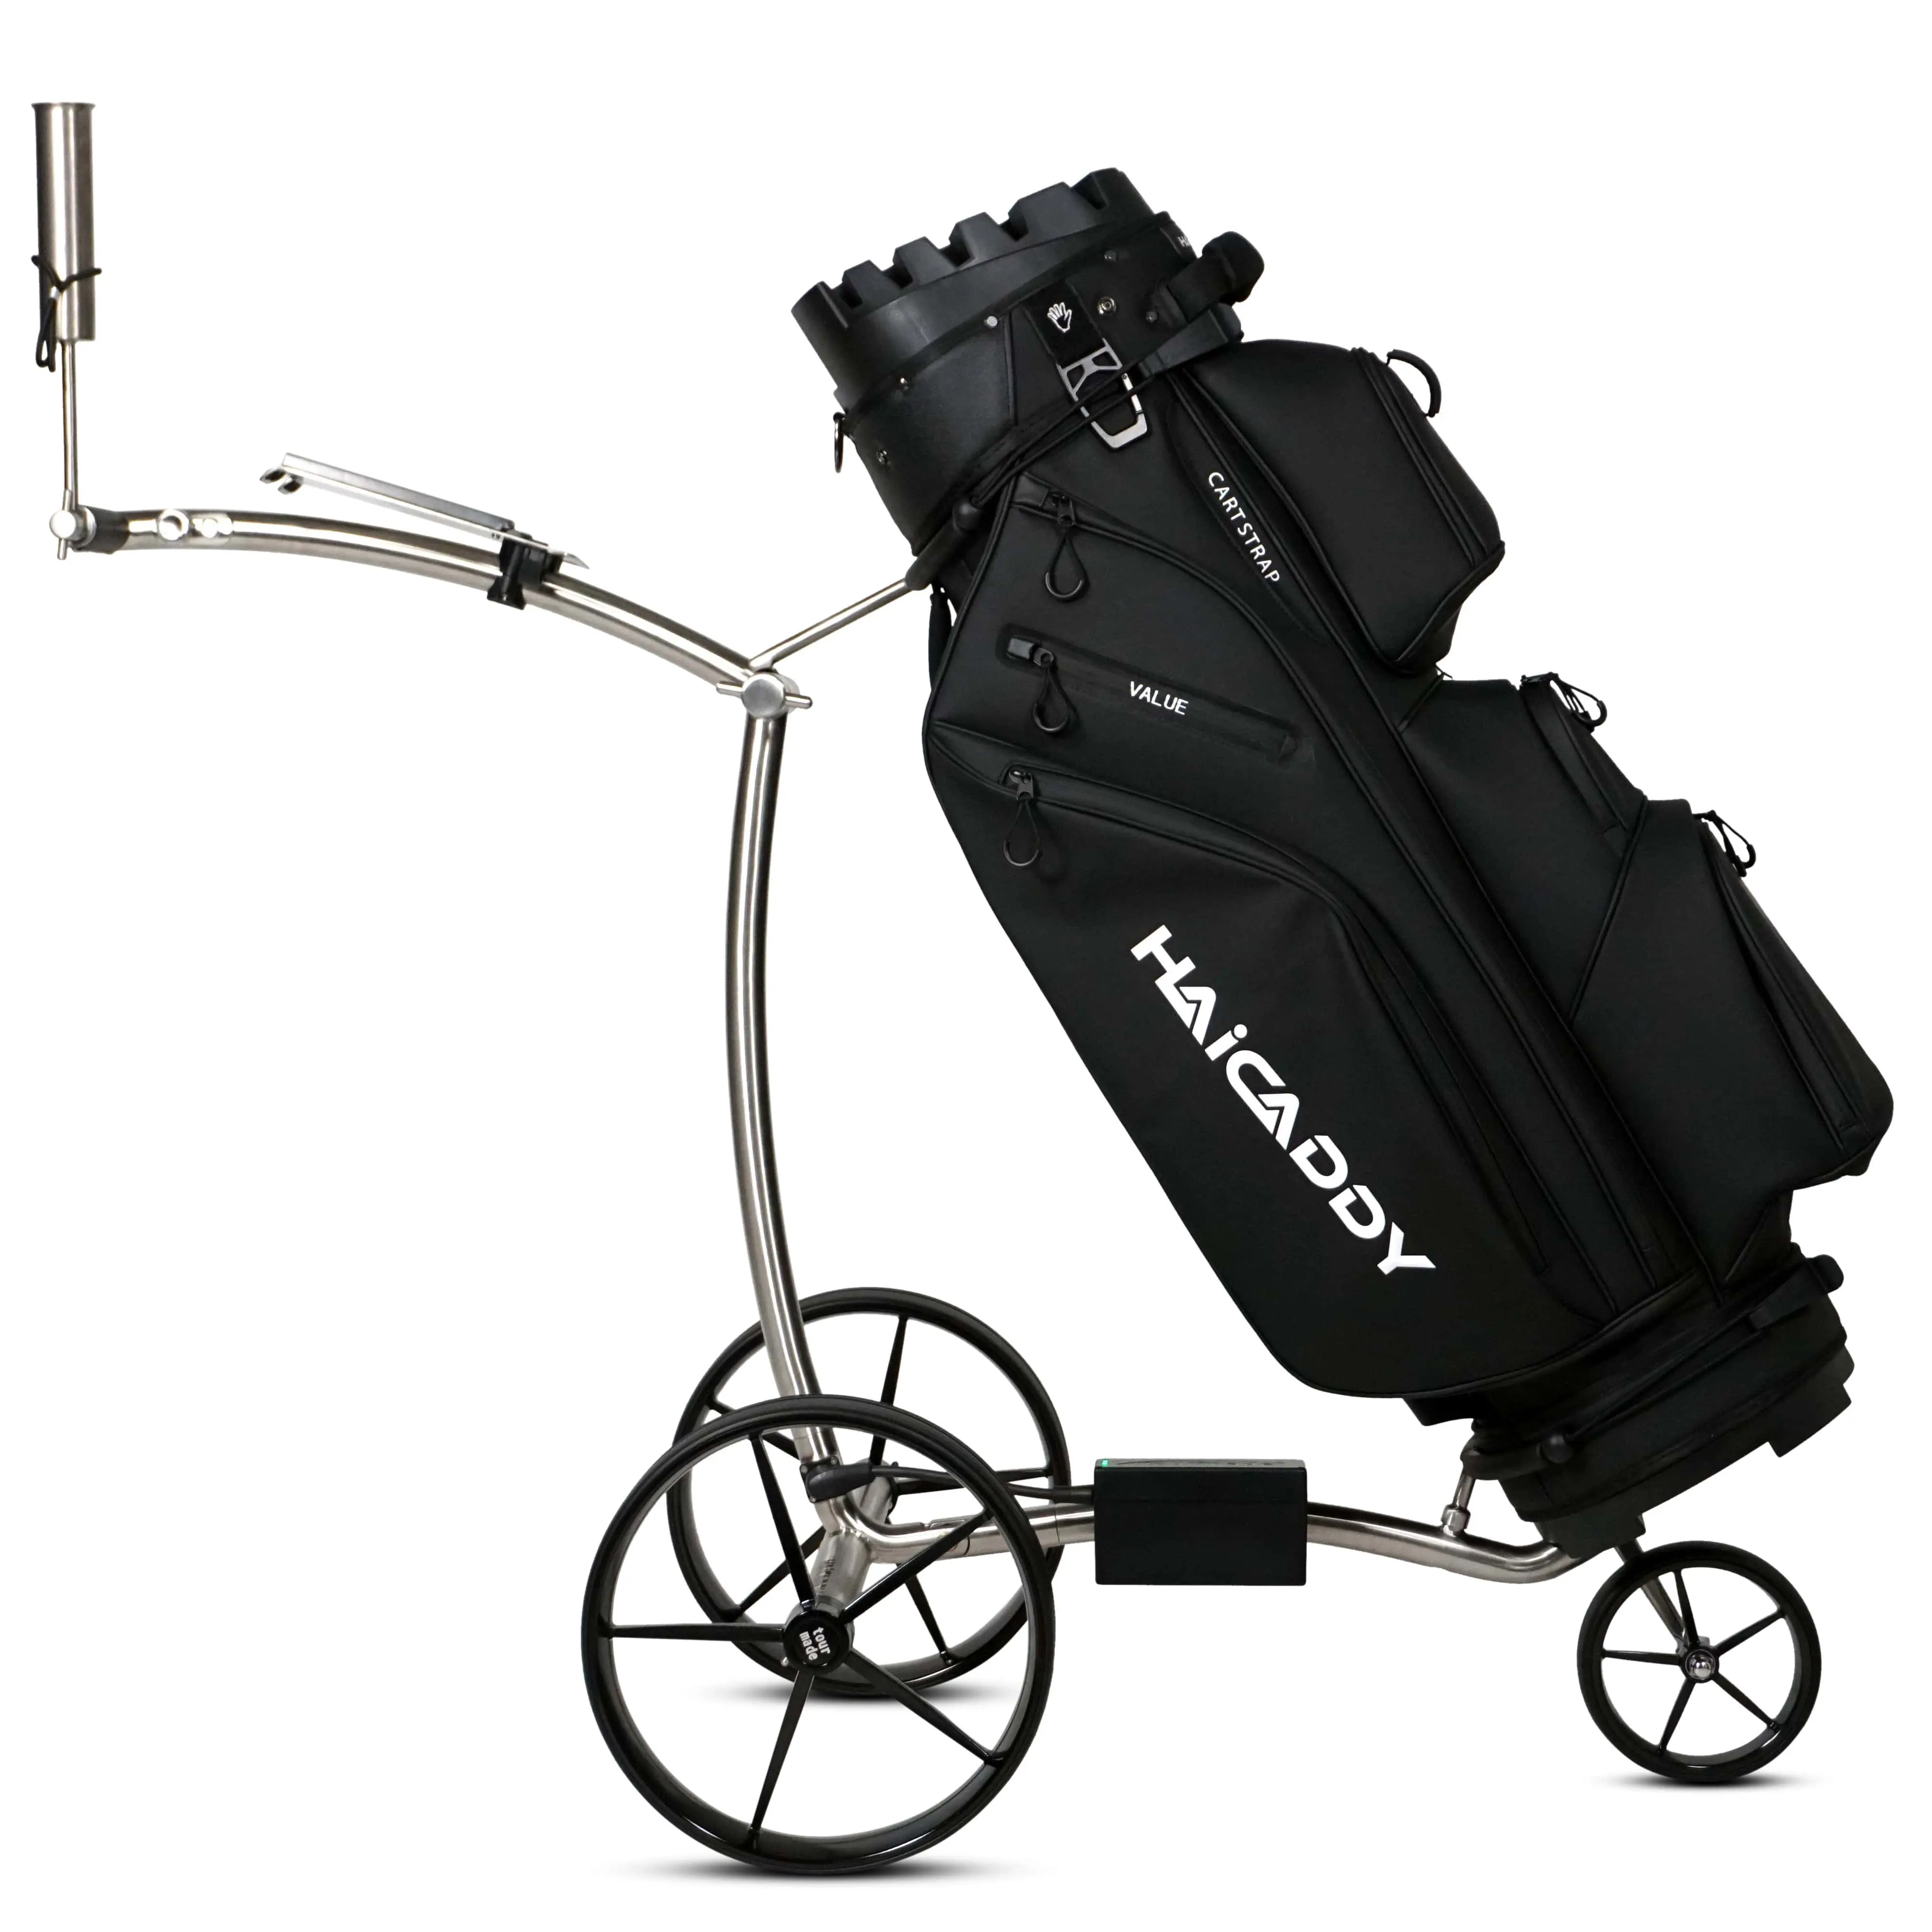 Tour Made Haicaddy® HC9S electric golf trolley frame curved brushed